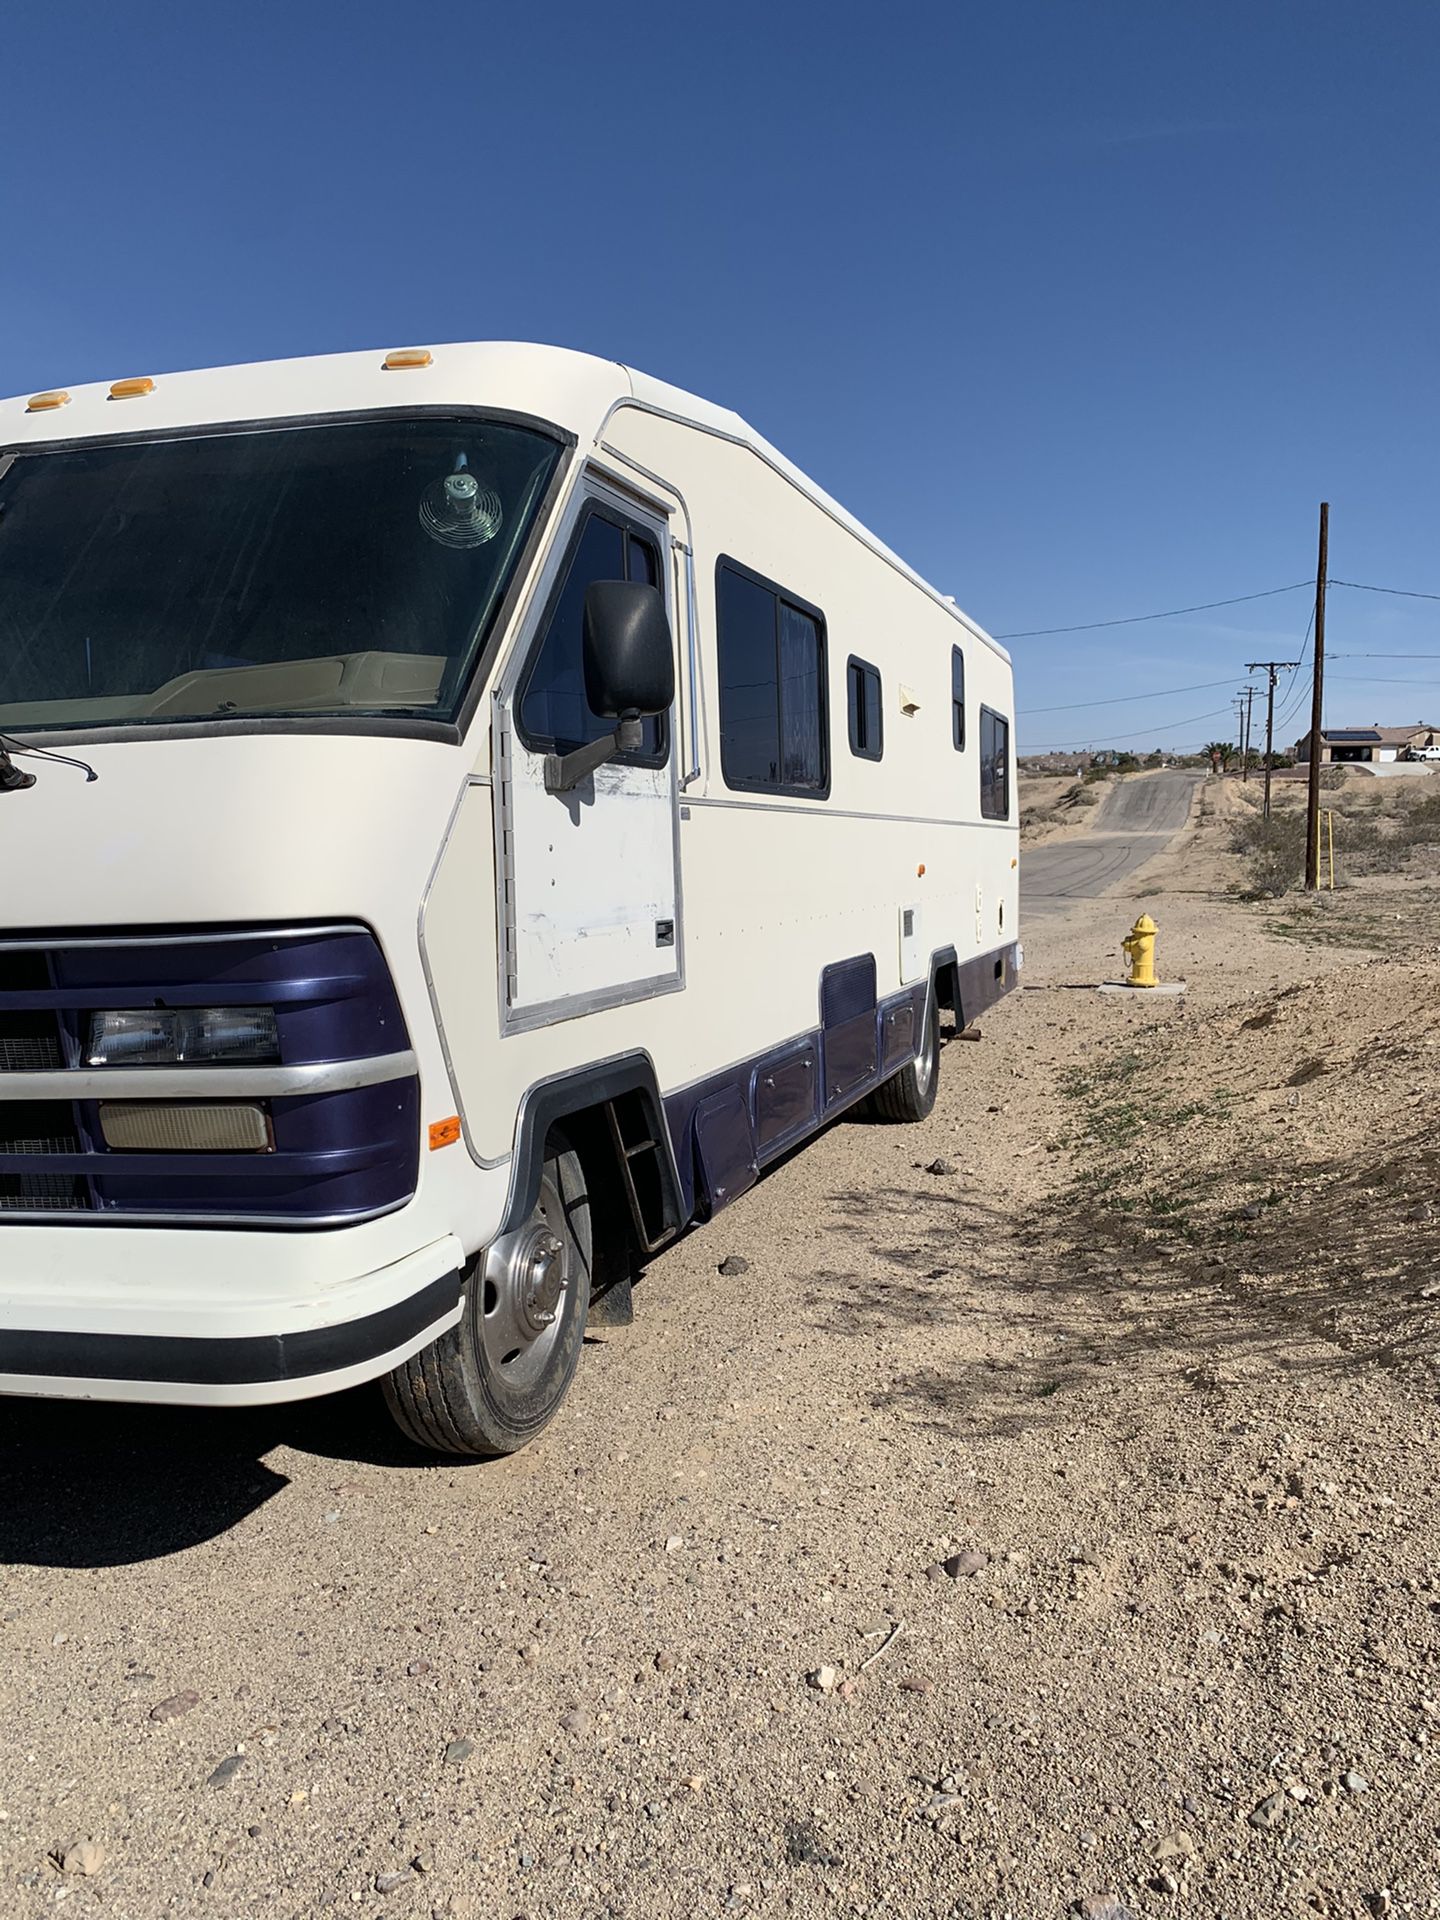 ‘90 or ‘91 RV.